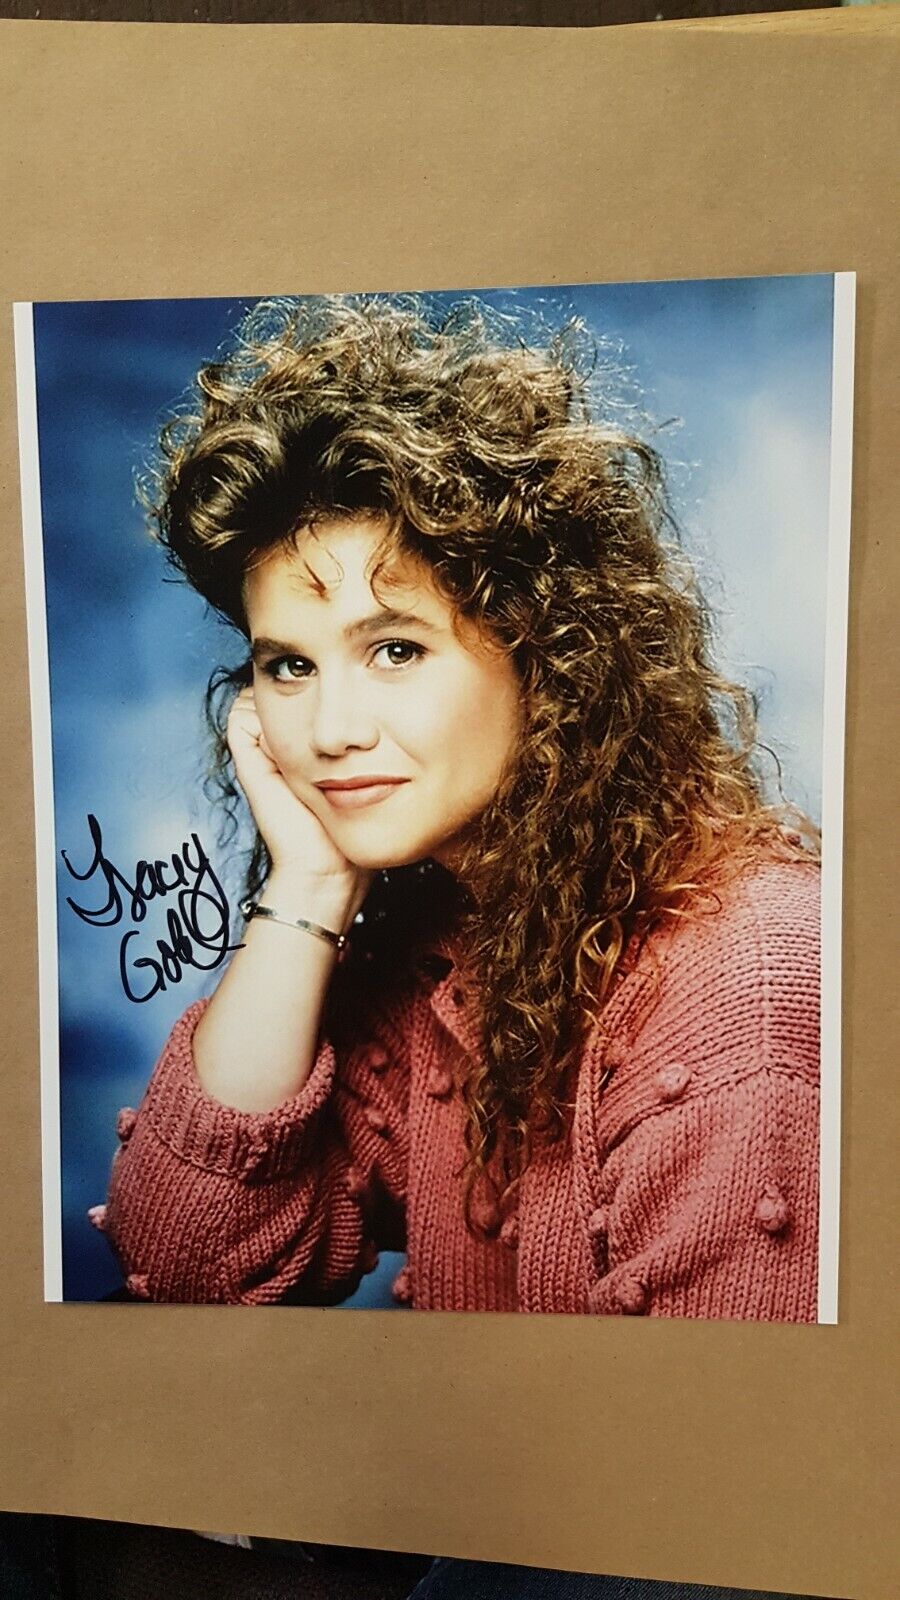 Tracey Gold Autographed Photo 8x10 Tv Actor Signed